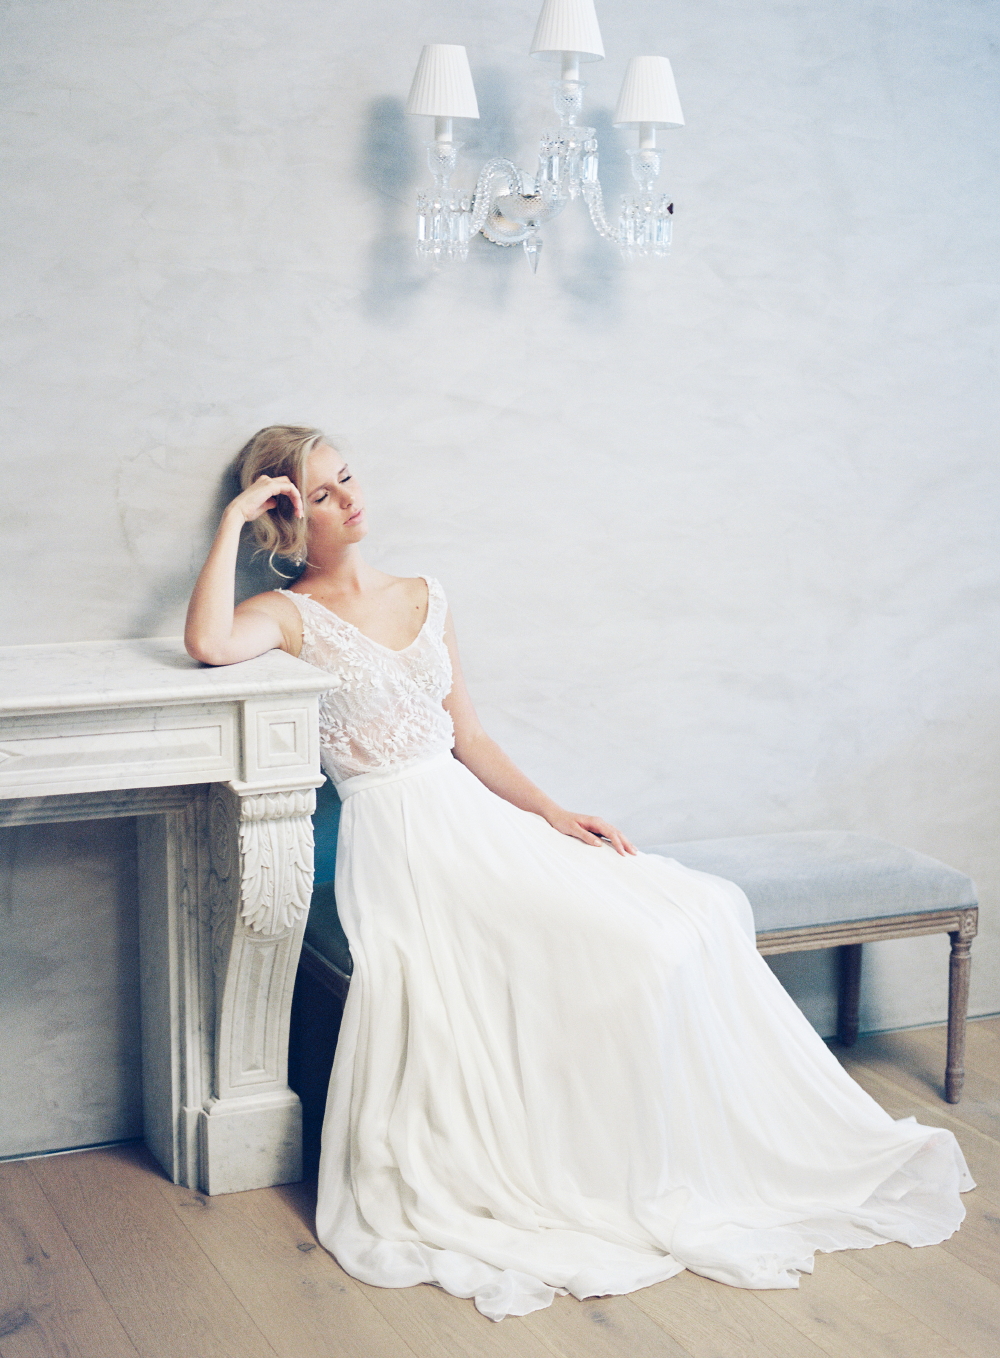 Maguretta bridal gown by Tanya Anic